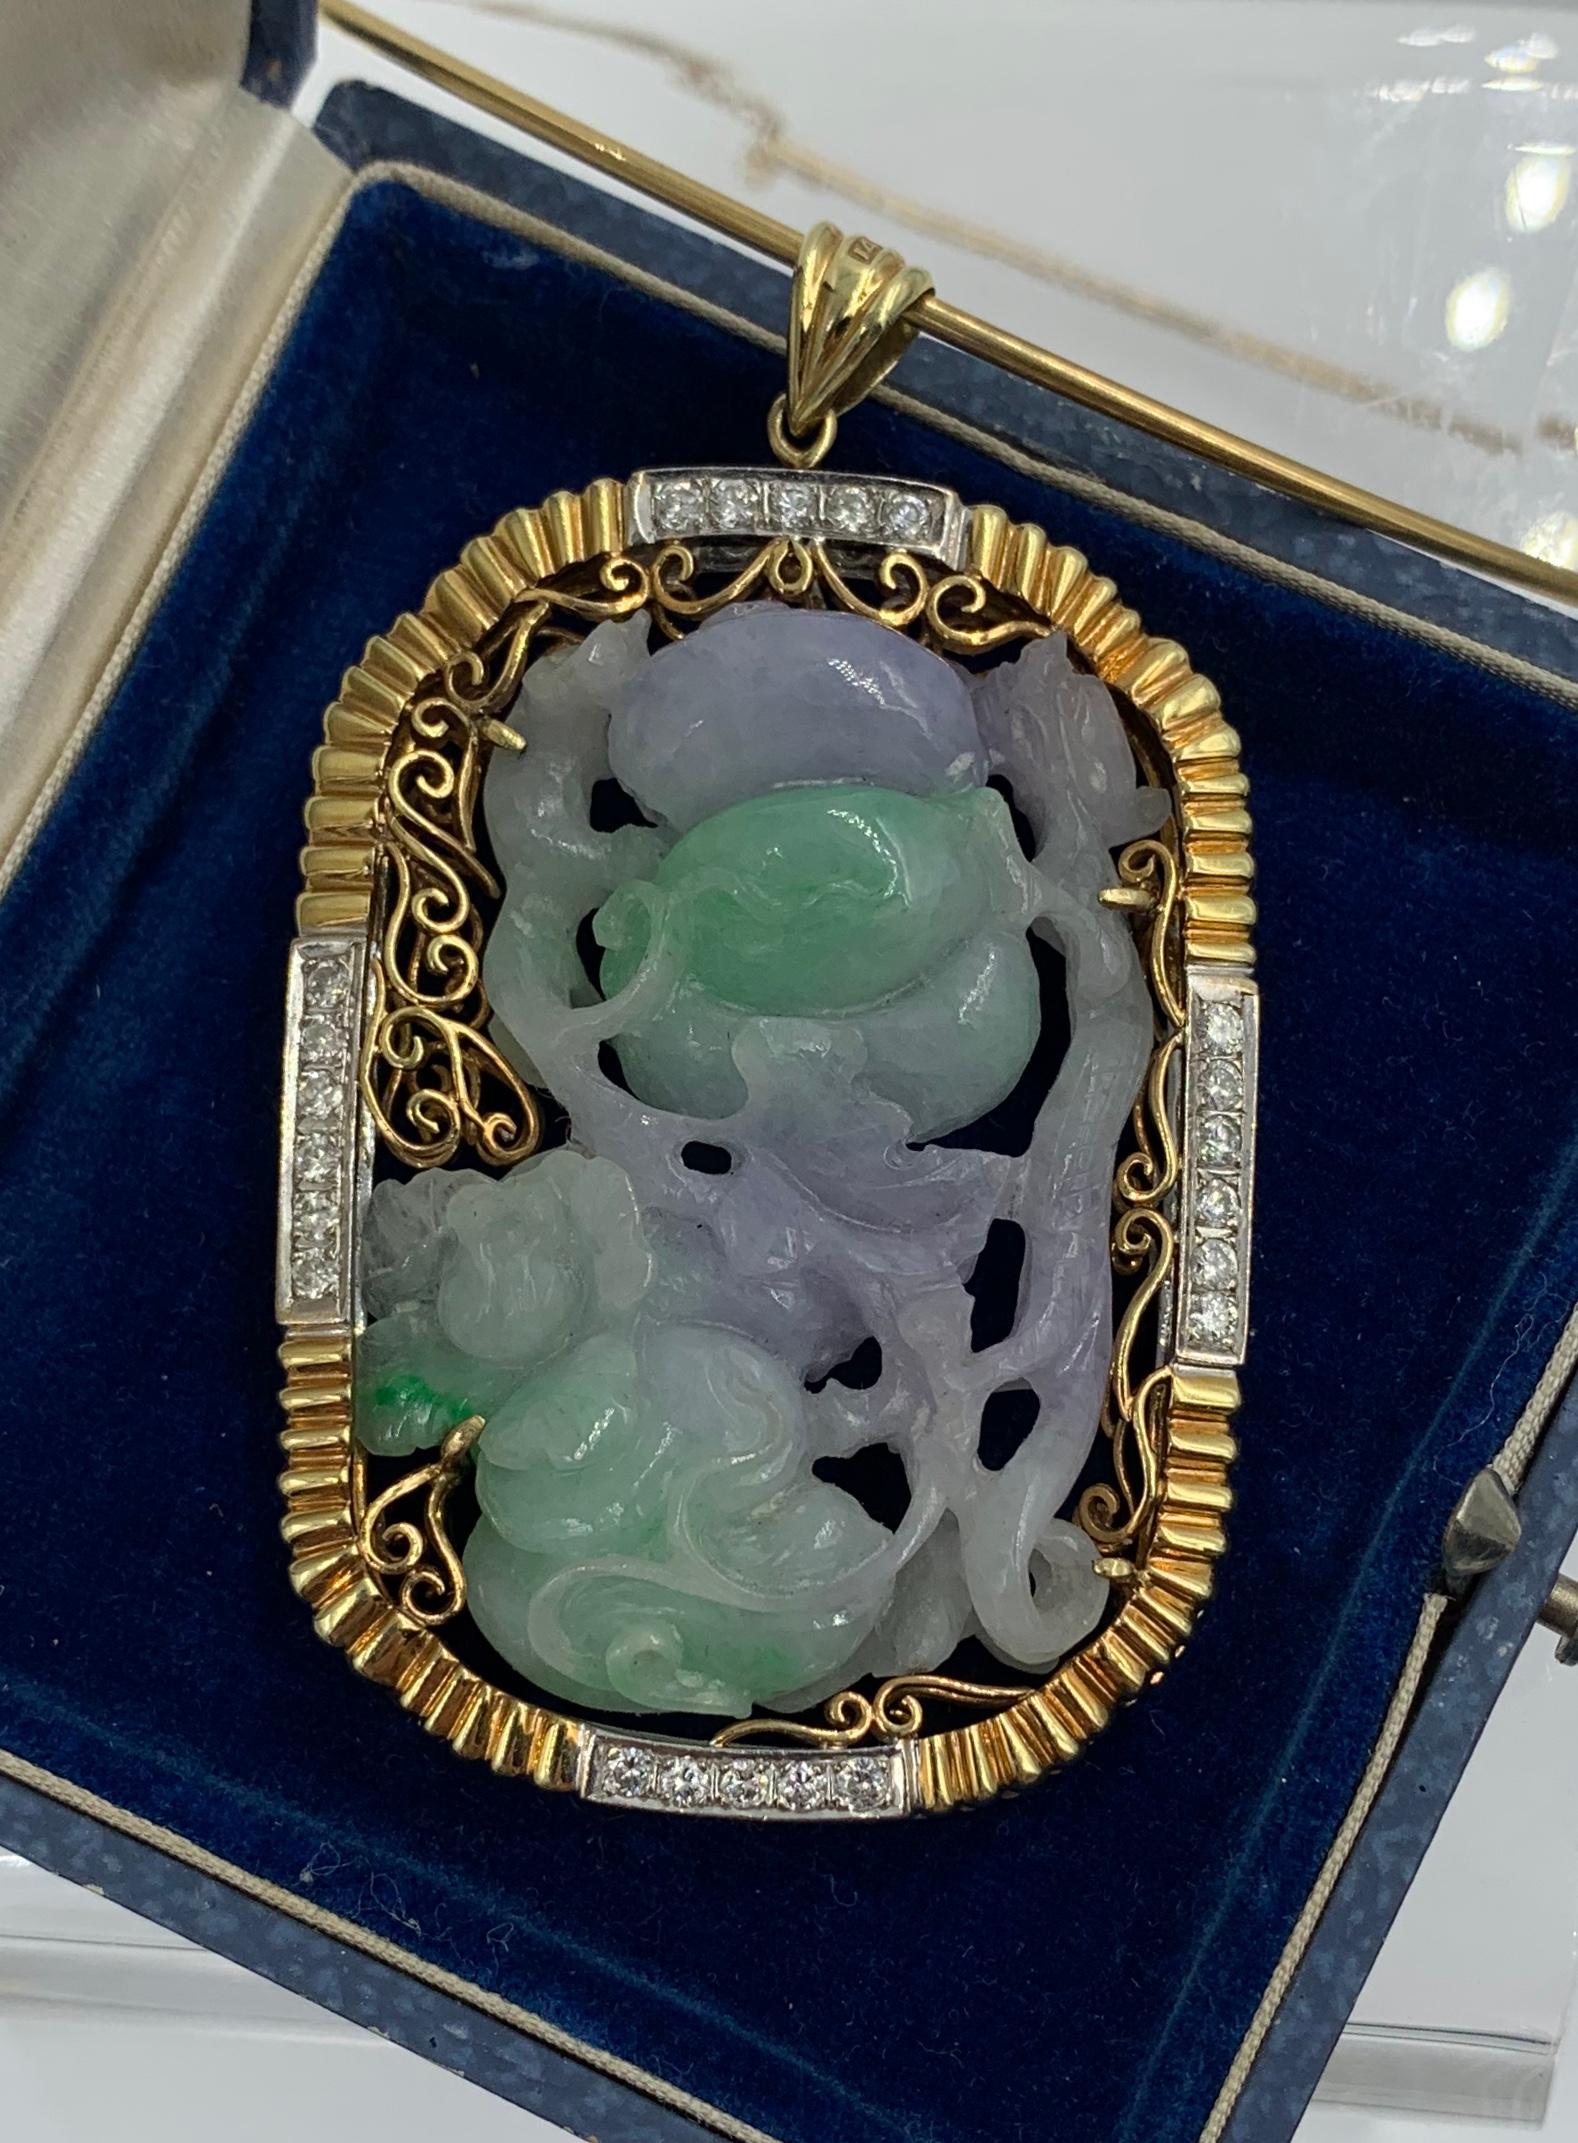 This is a spectacular two sided Antique Jade Diamond Necklace with a magnificent 2 3/4 inch pendant with a carved Lavender and Green Jade in a flower and fruit motif of great beauty.   The Jade is set in a 14 Karat White and Yellow gold frame which